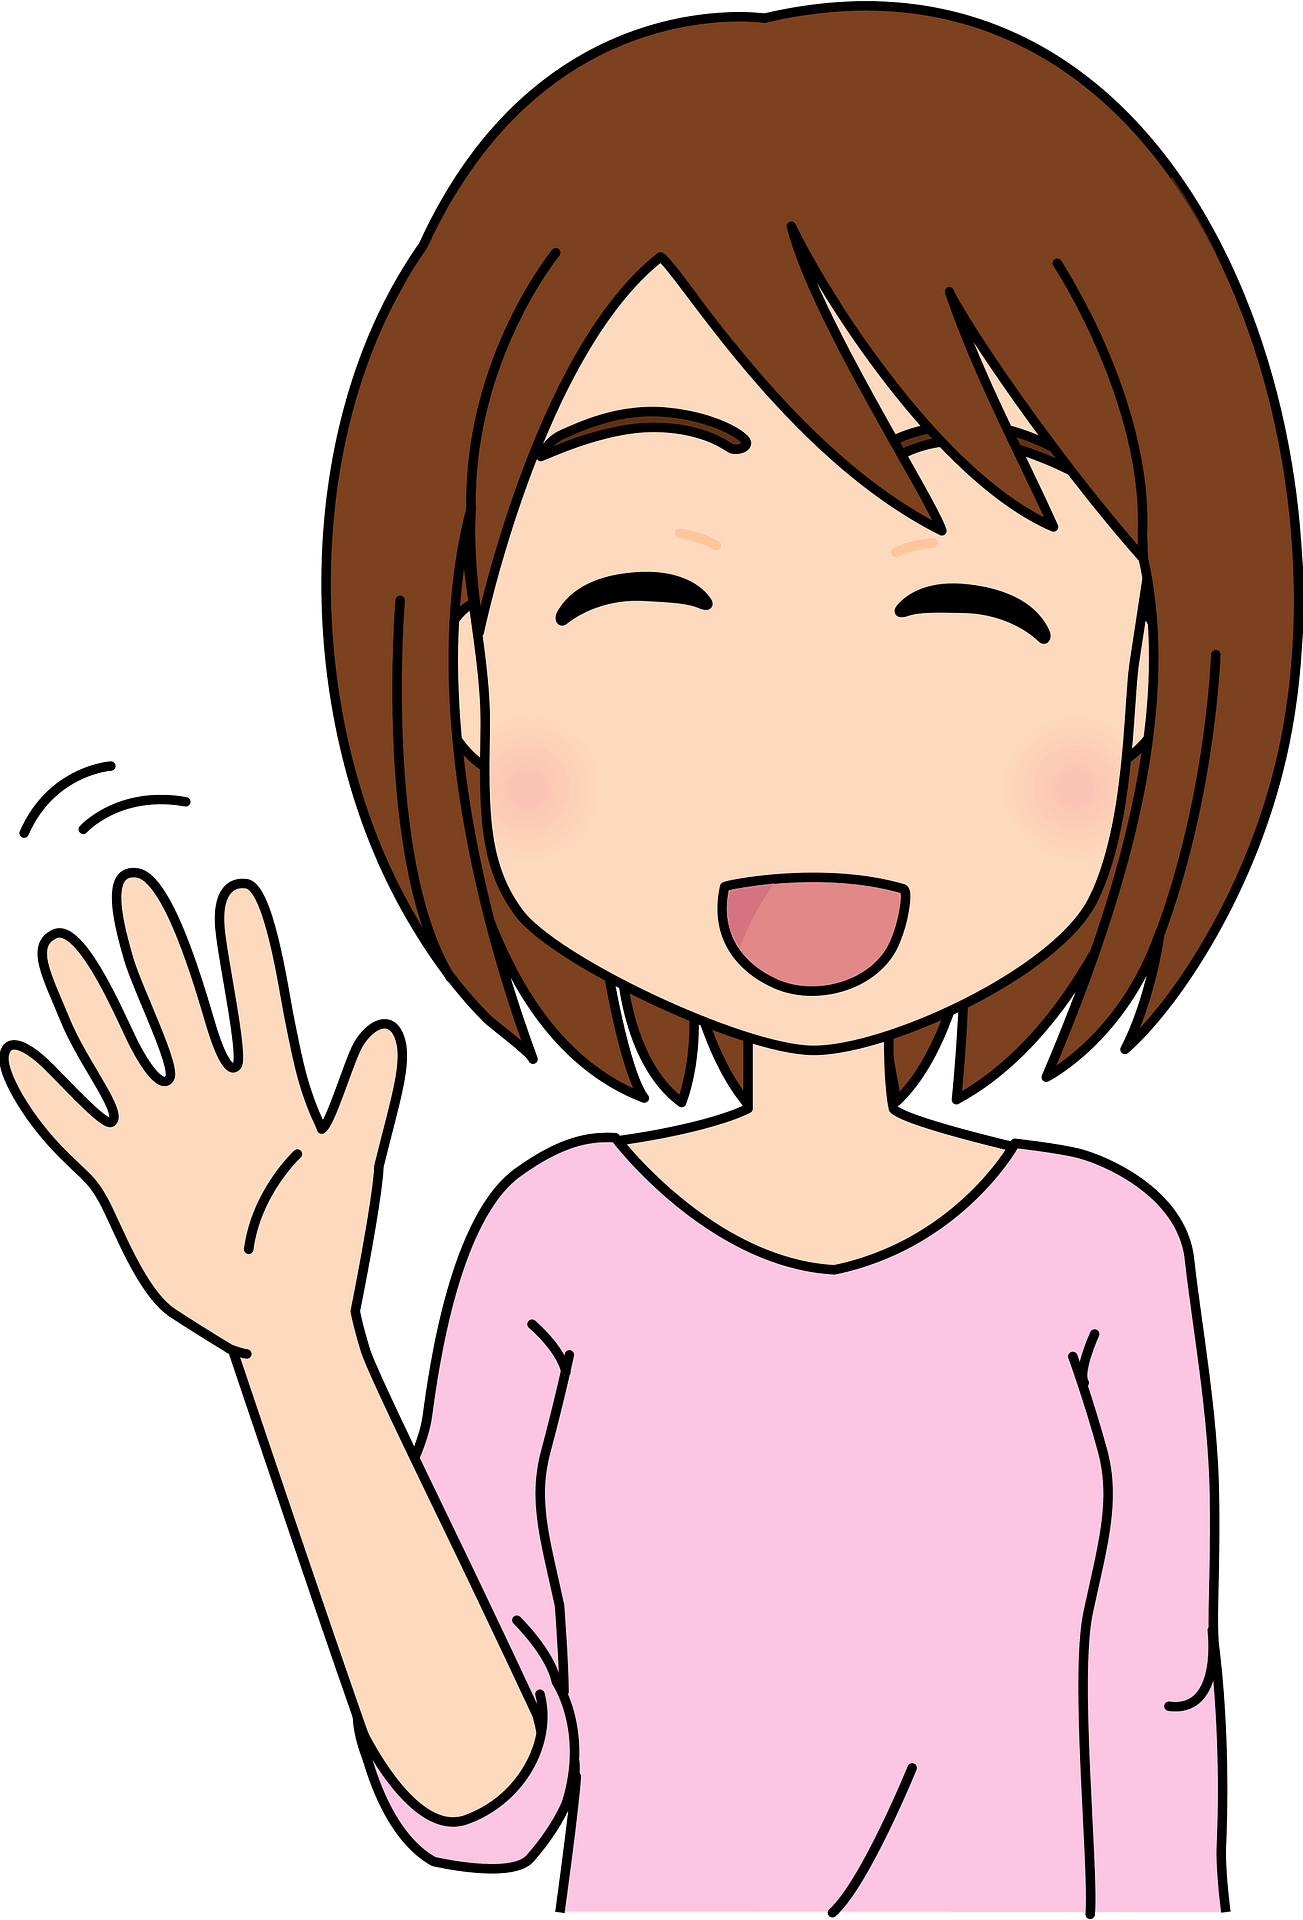 Waving Goodbye Clipart Images Free Download Png Transparent Clip